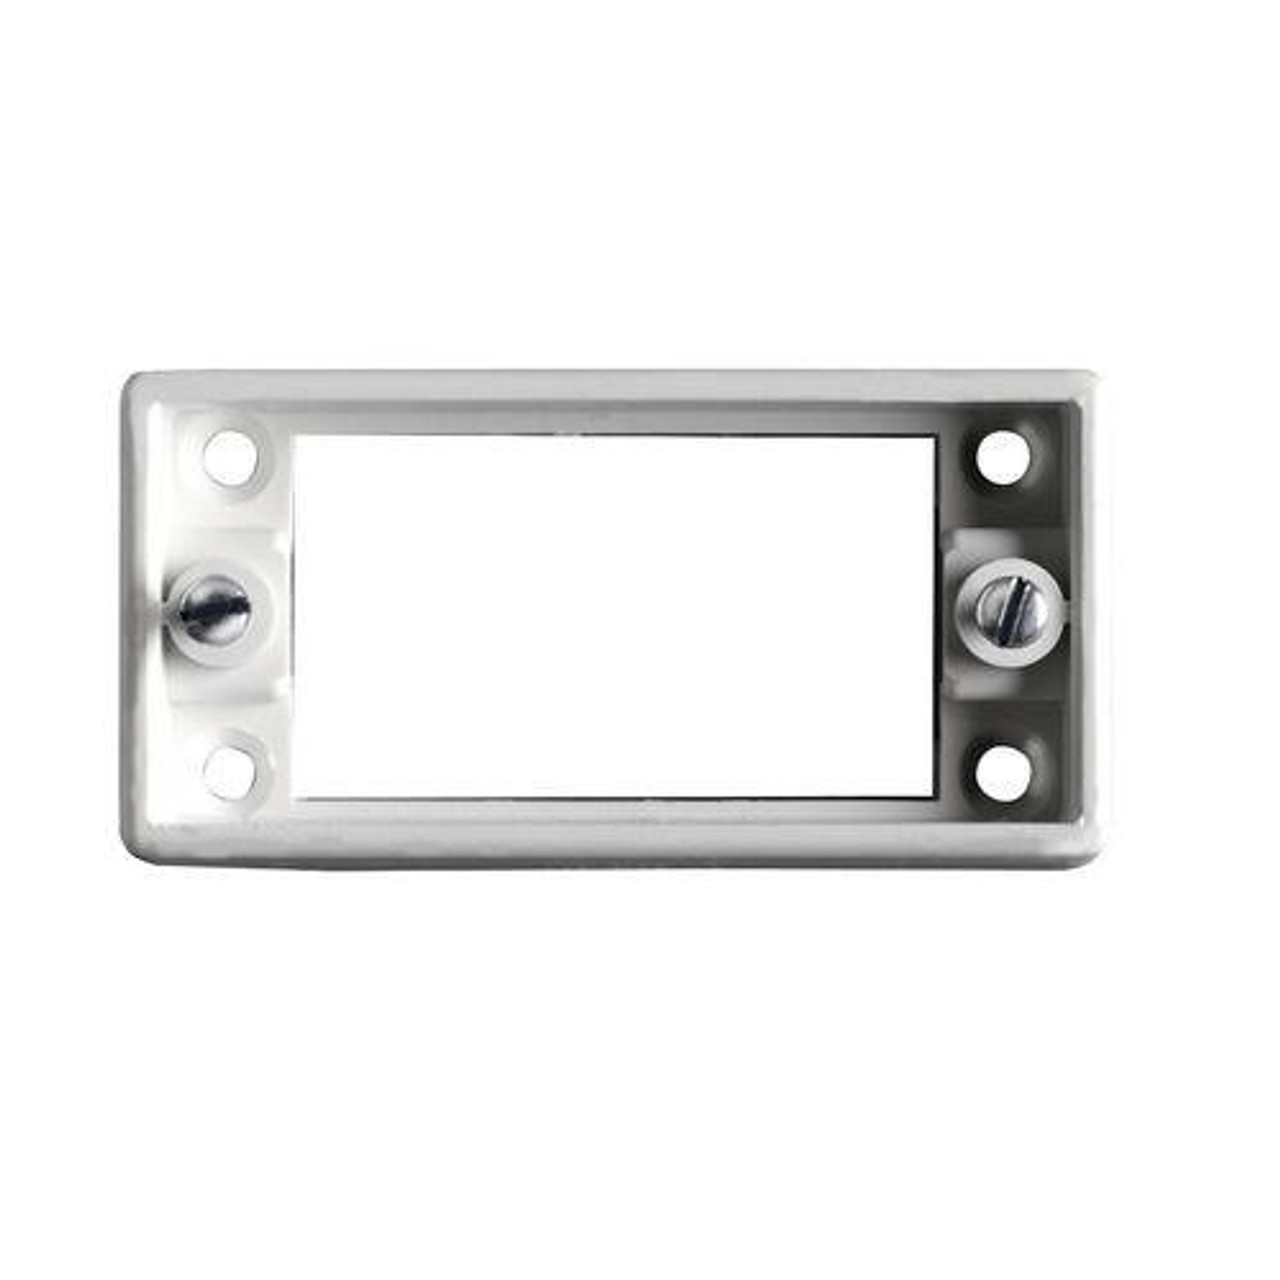 hpm HPM Mounting Block For Architrave Switch CD141WE